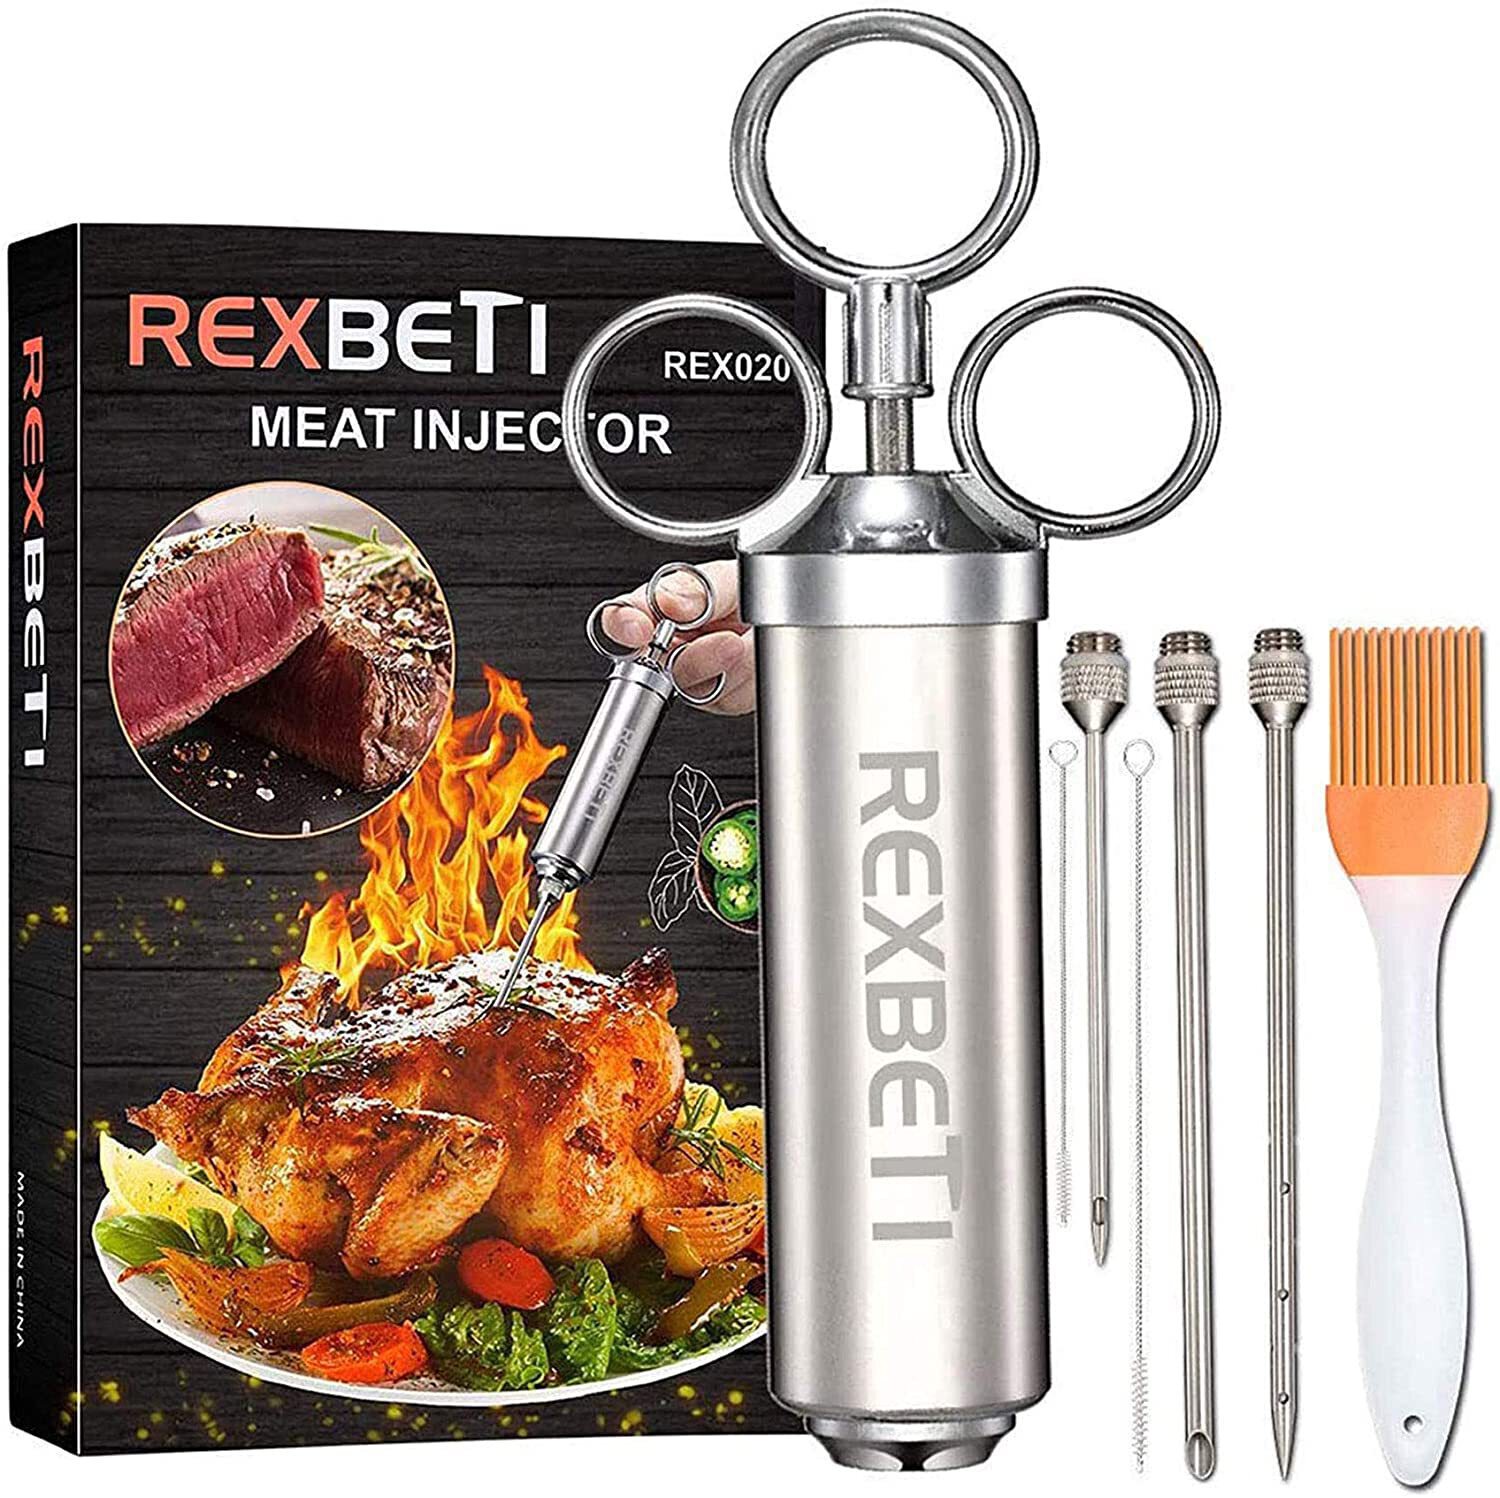 RexBeti Stainless Steel Meat Injector